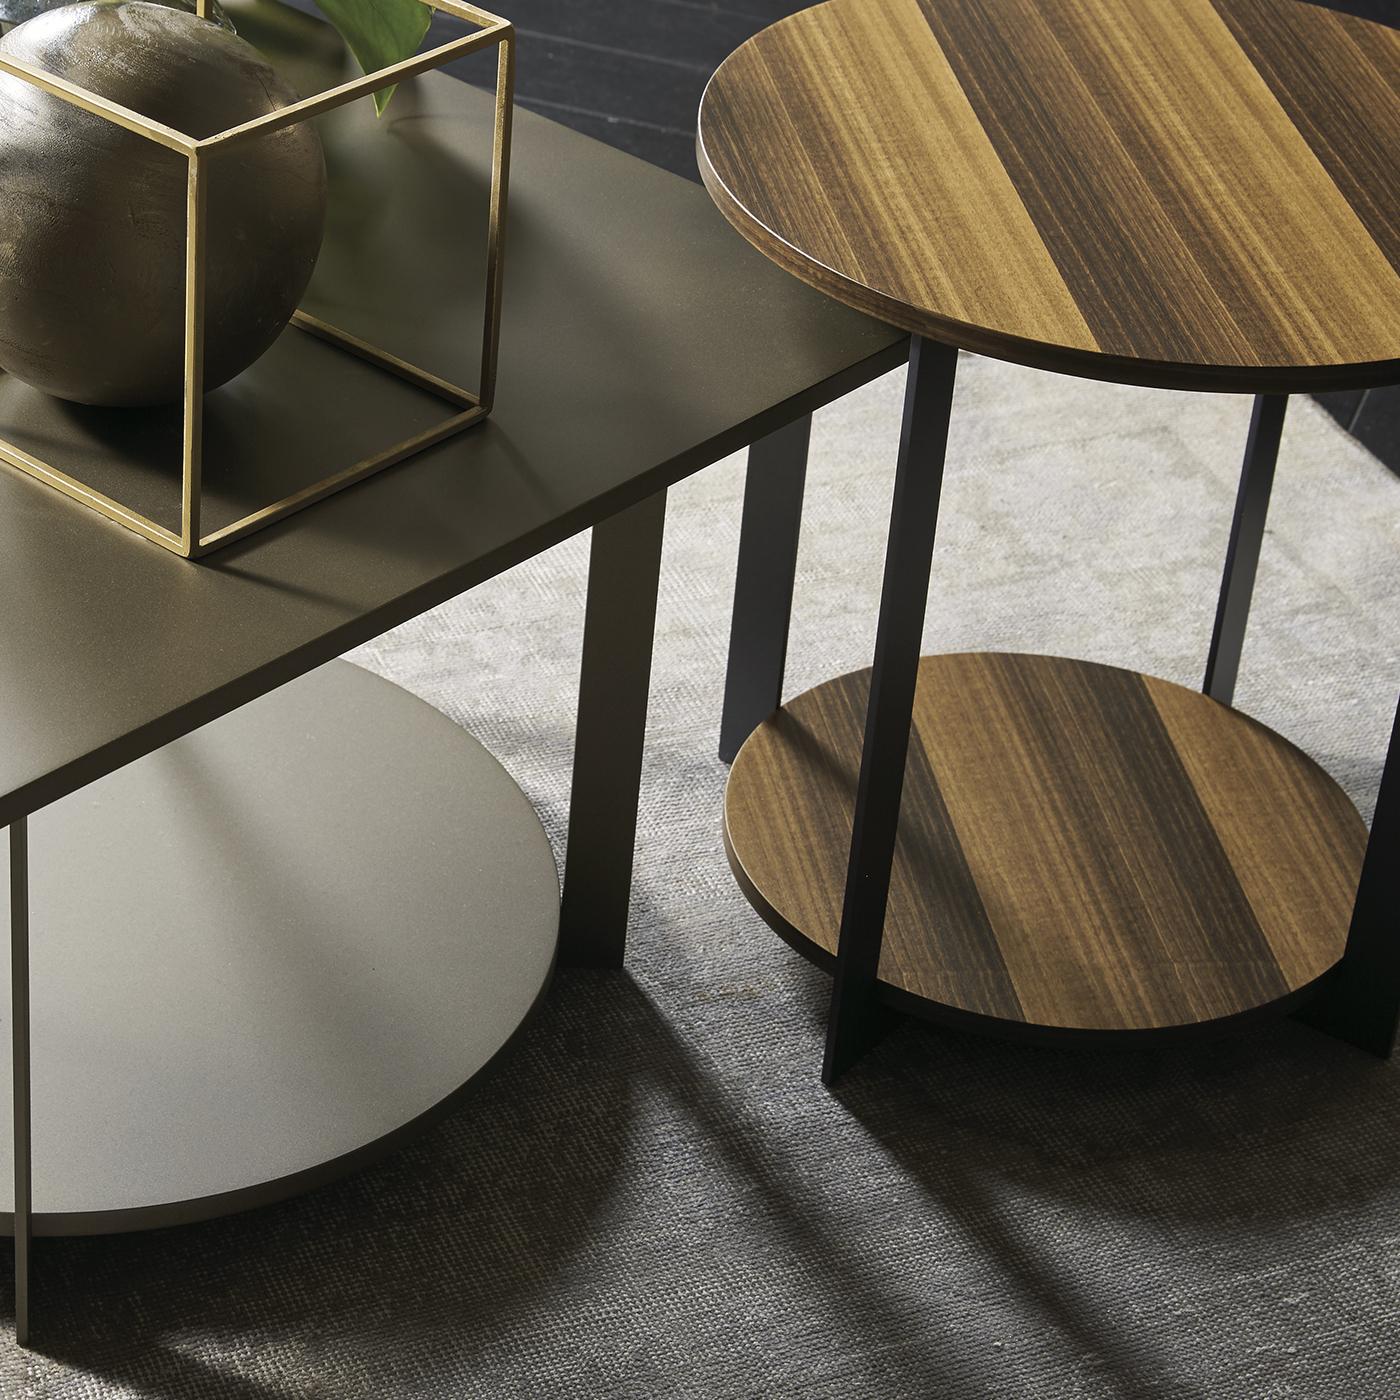 Part of a collection designed by Pierangeolo Sciuto, this side table is refined and modern and can be used in the living room, as well as in a study or bedroom. Its wooden structure has two ovals supported by a four-leg vertical structure. The metal